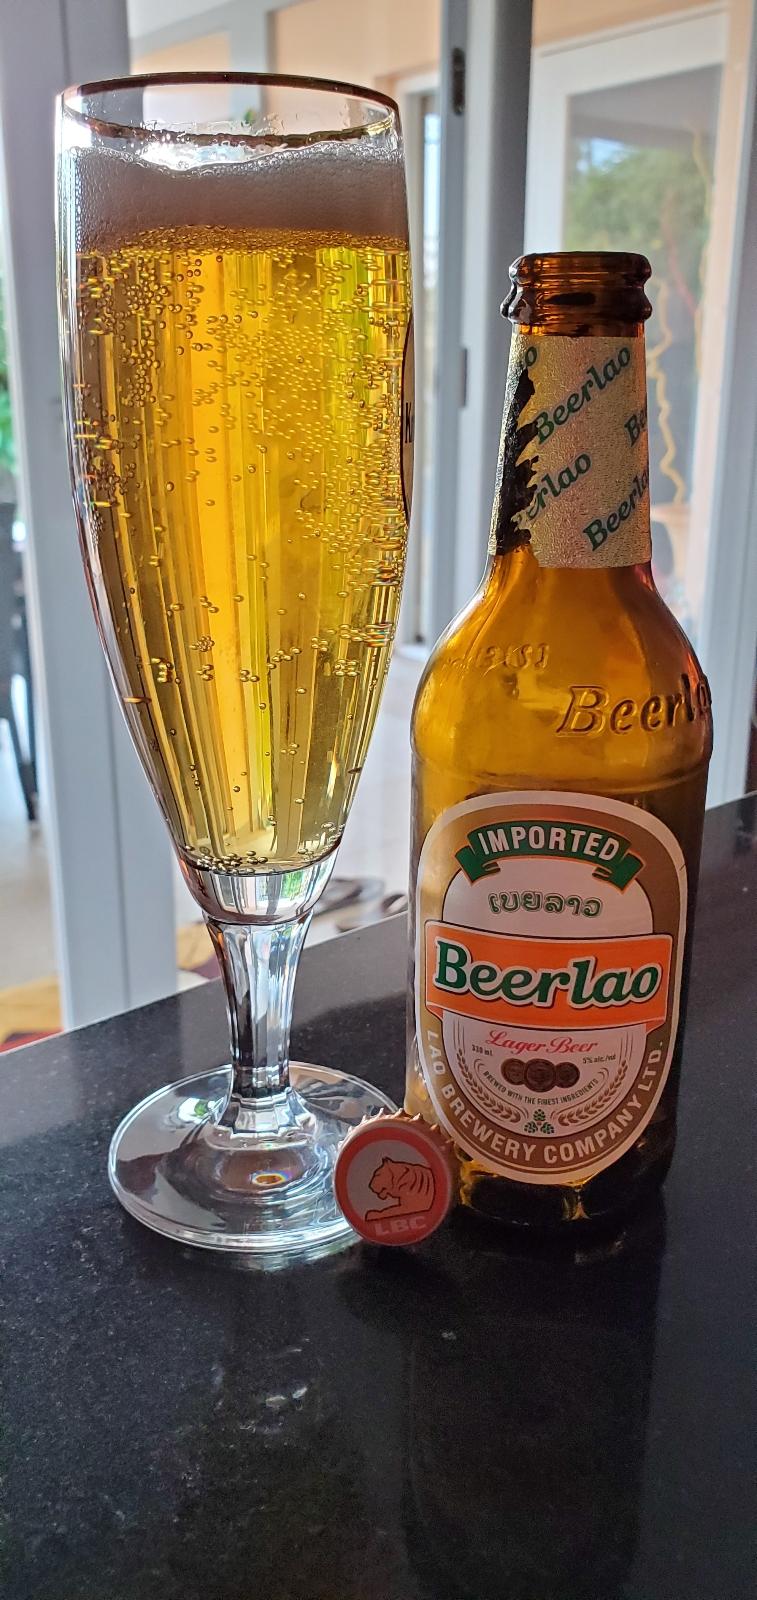 Beerlao Lager